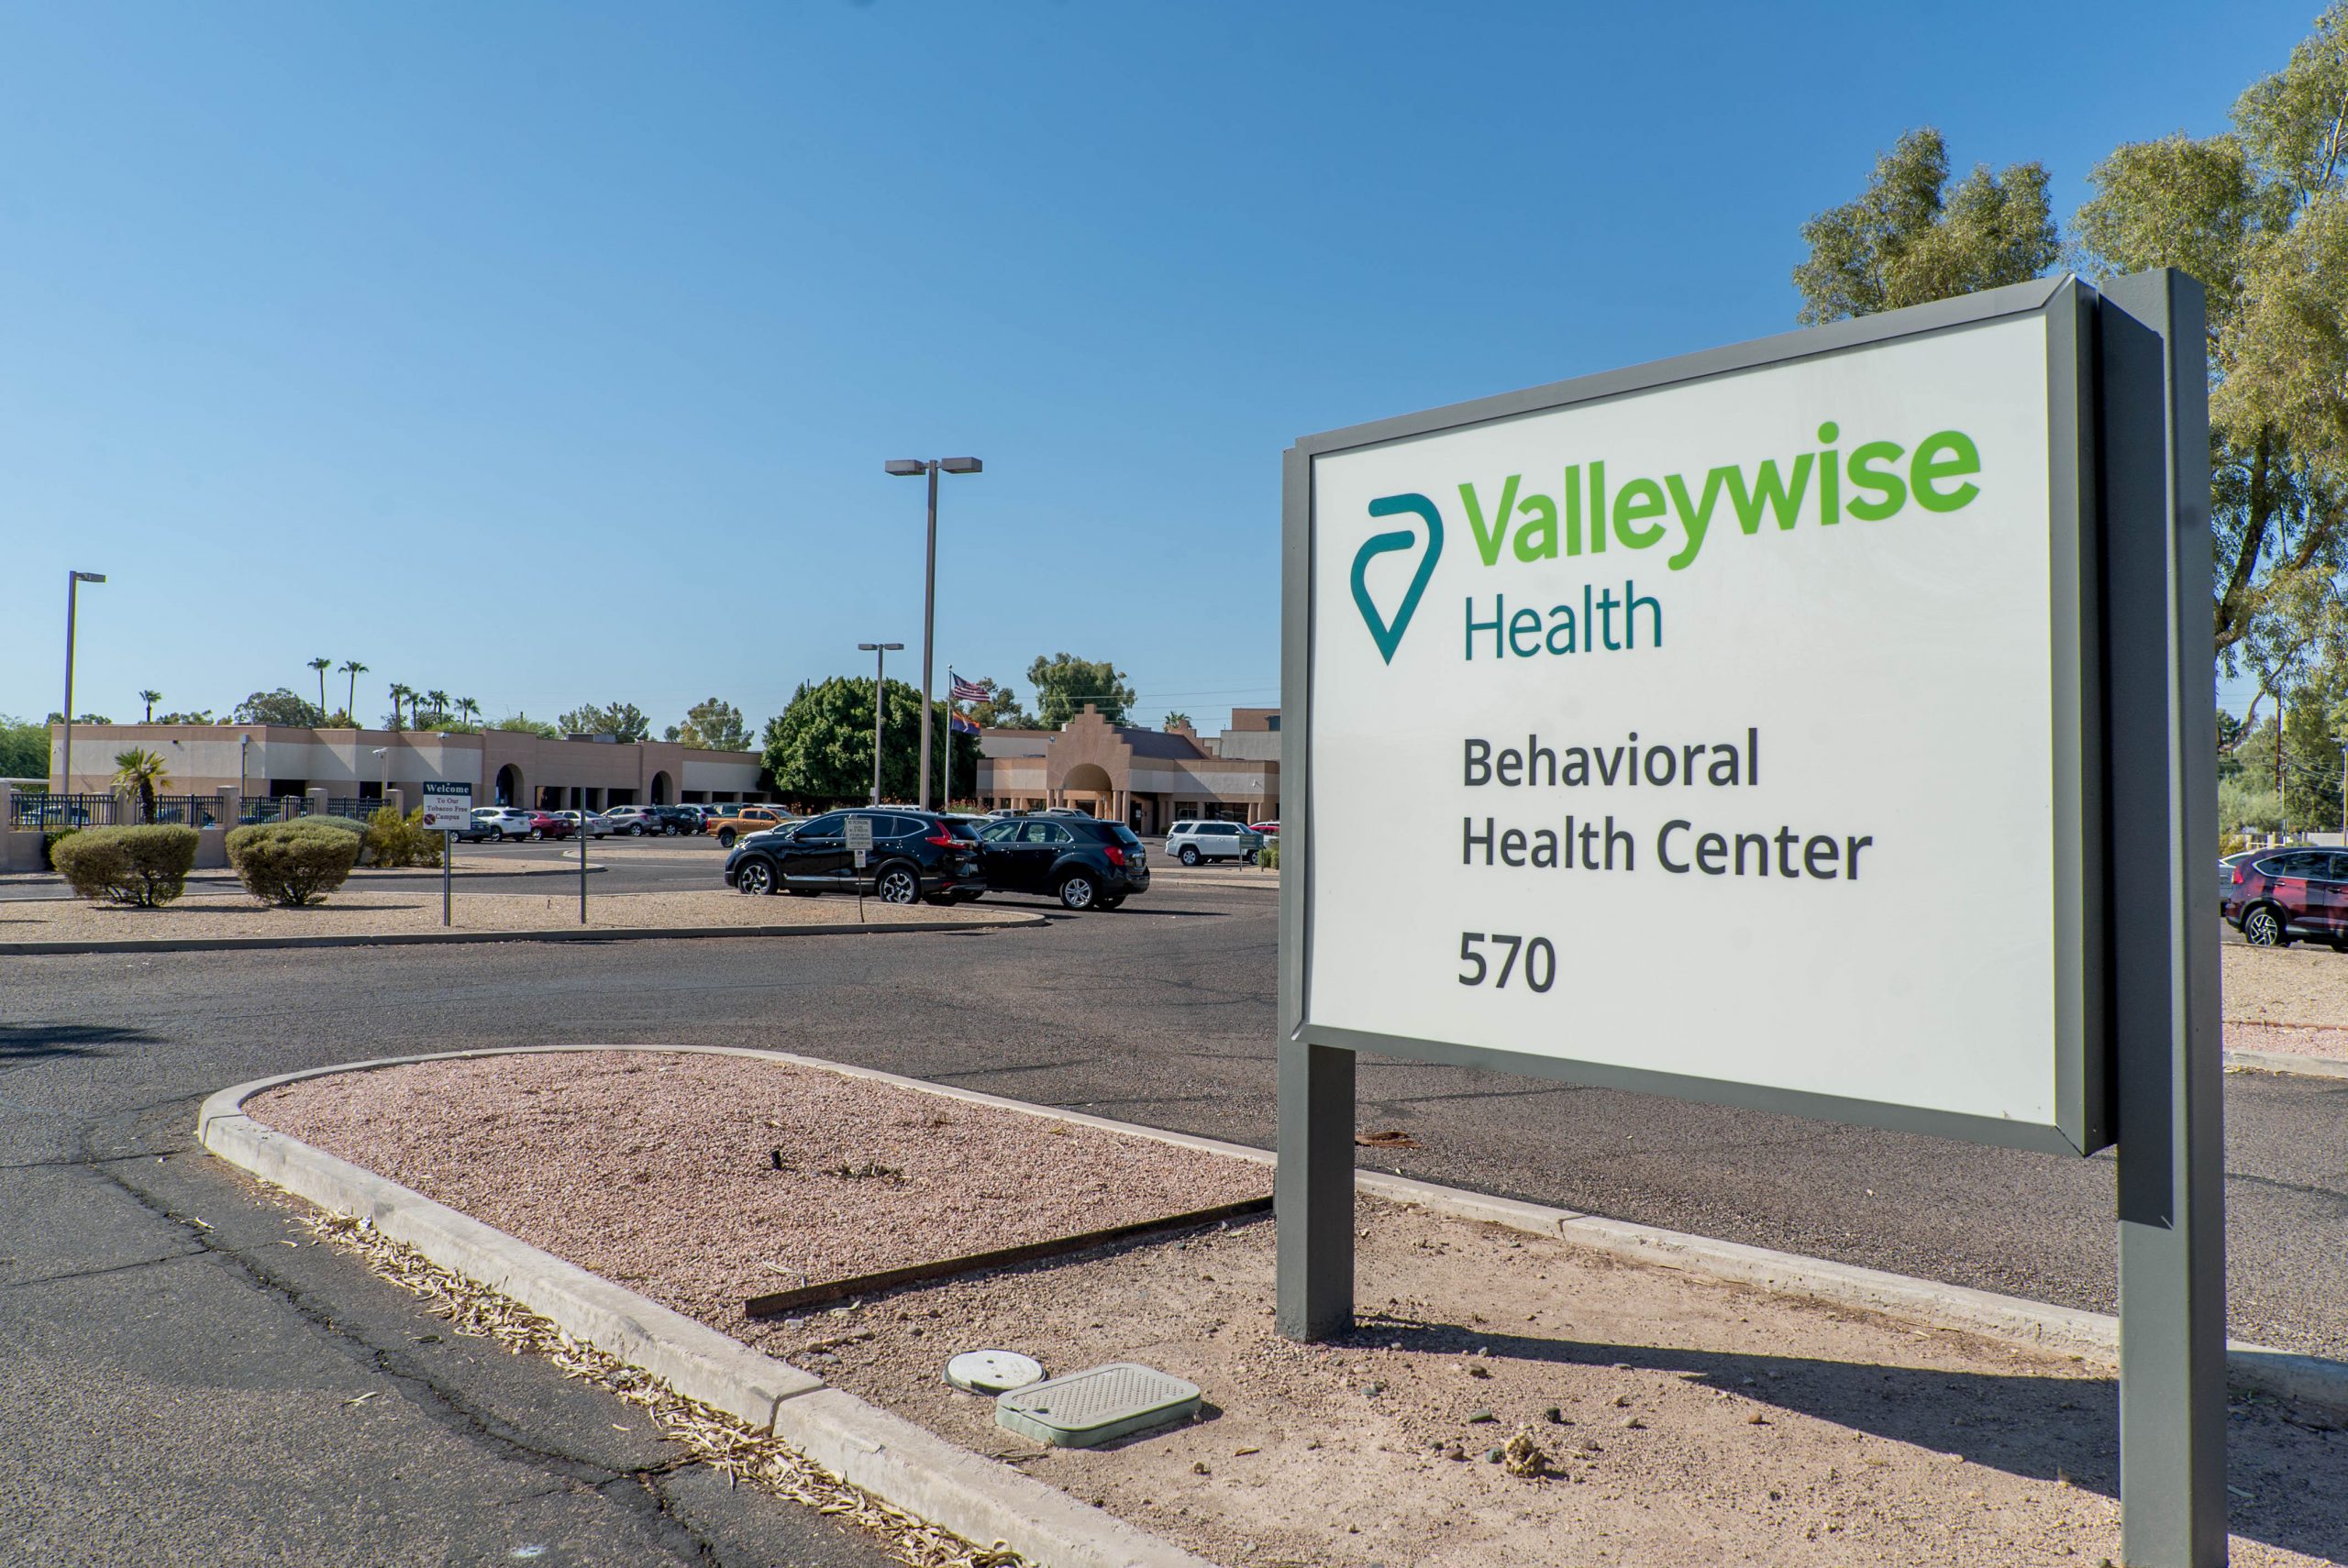 Valleywise Health Center front sign